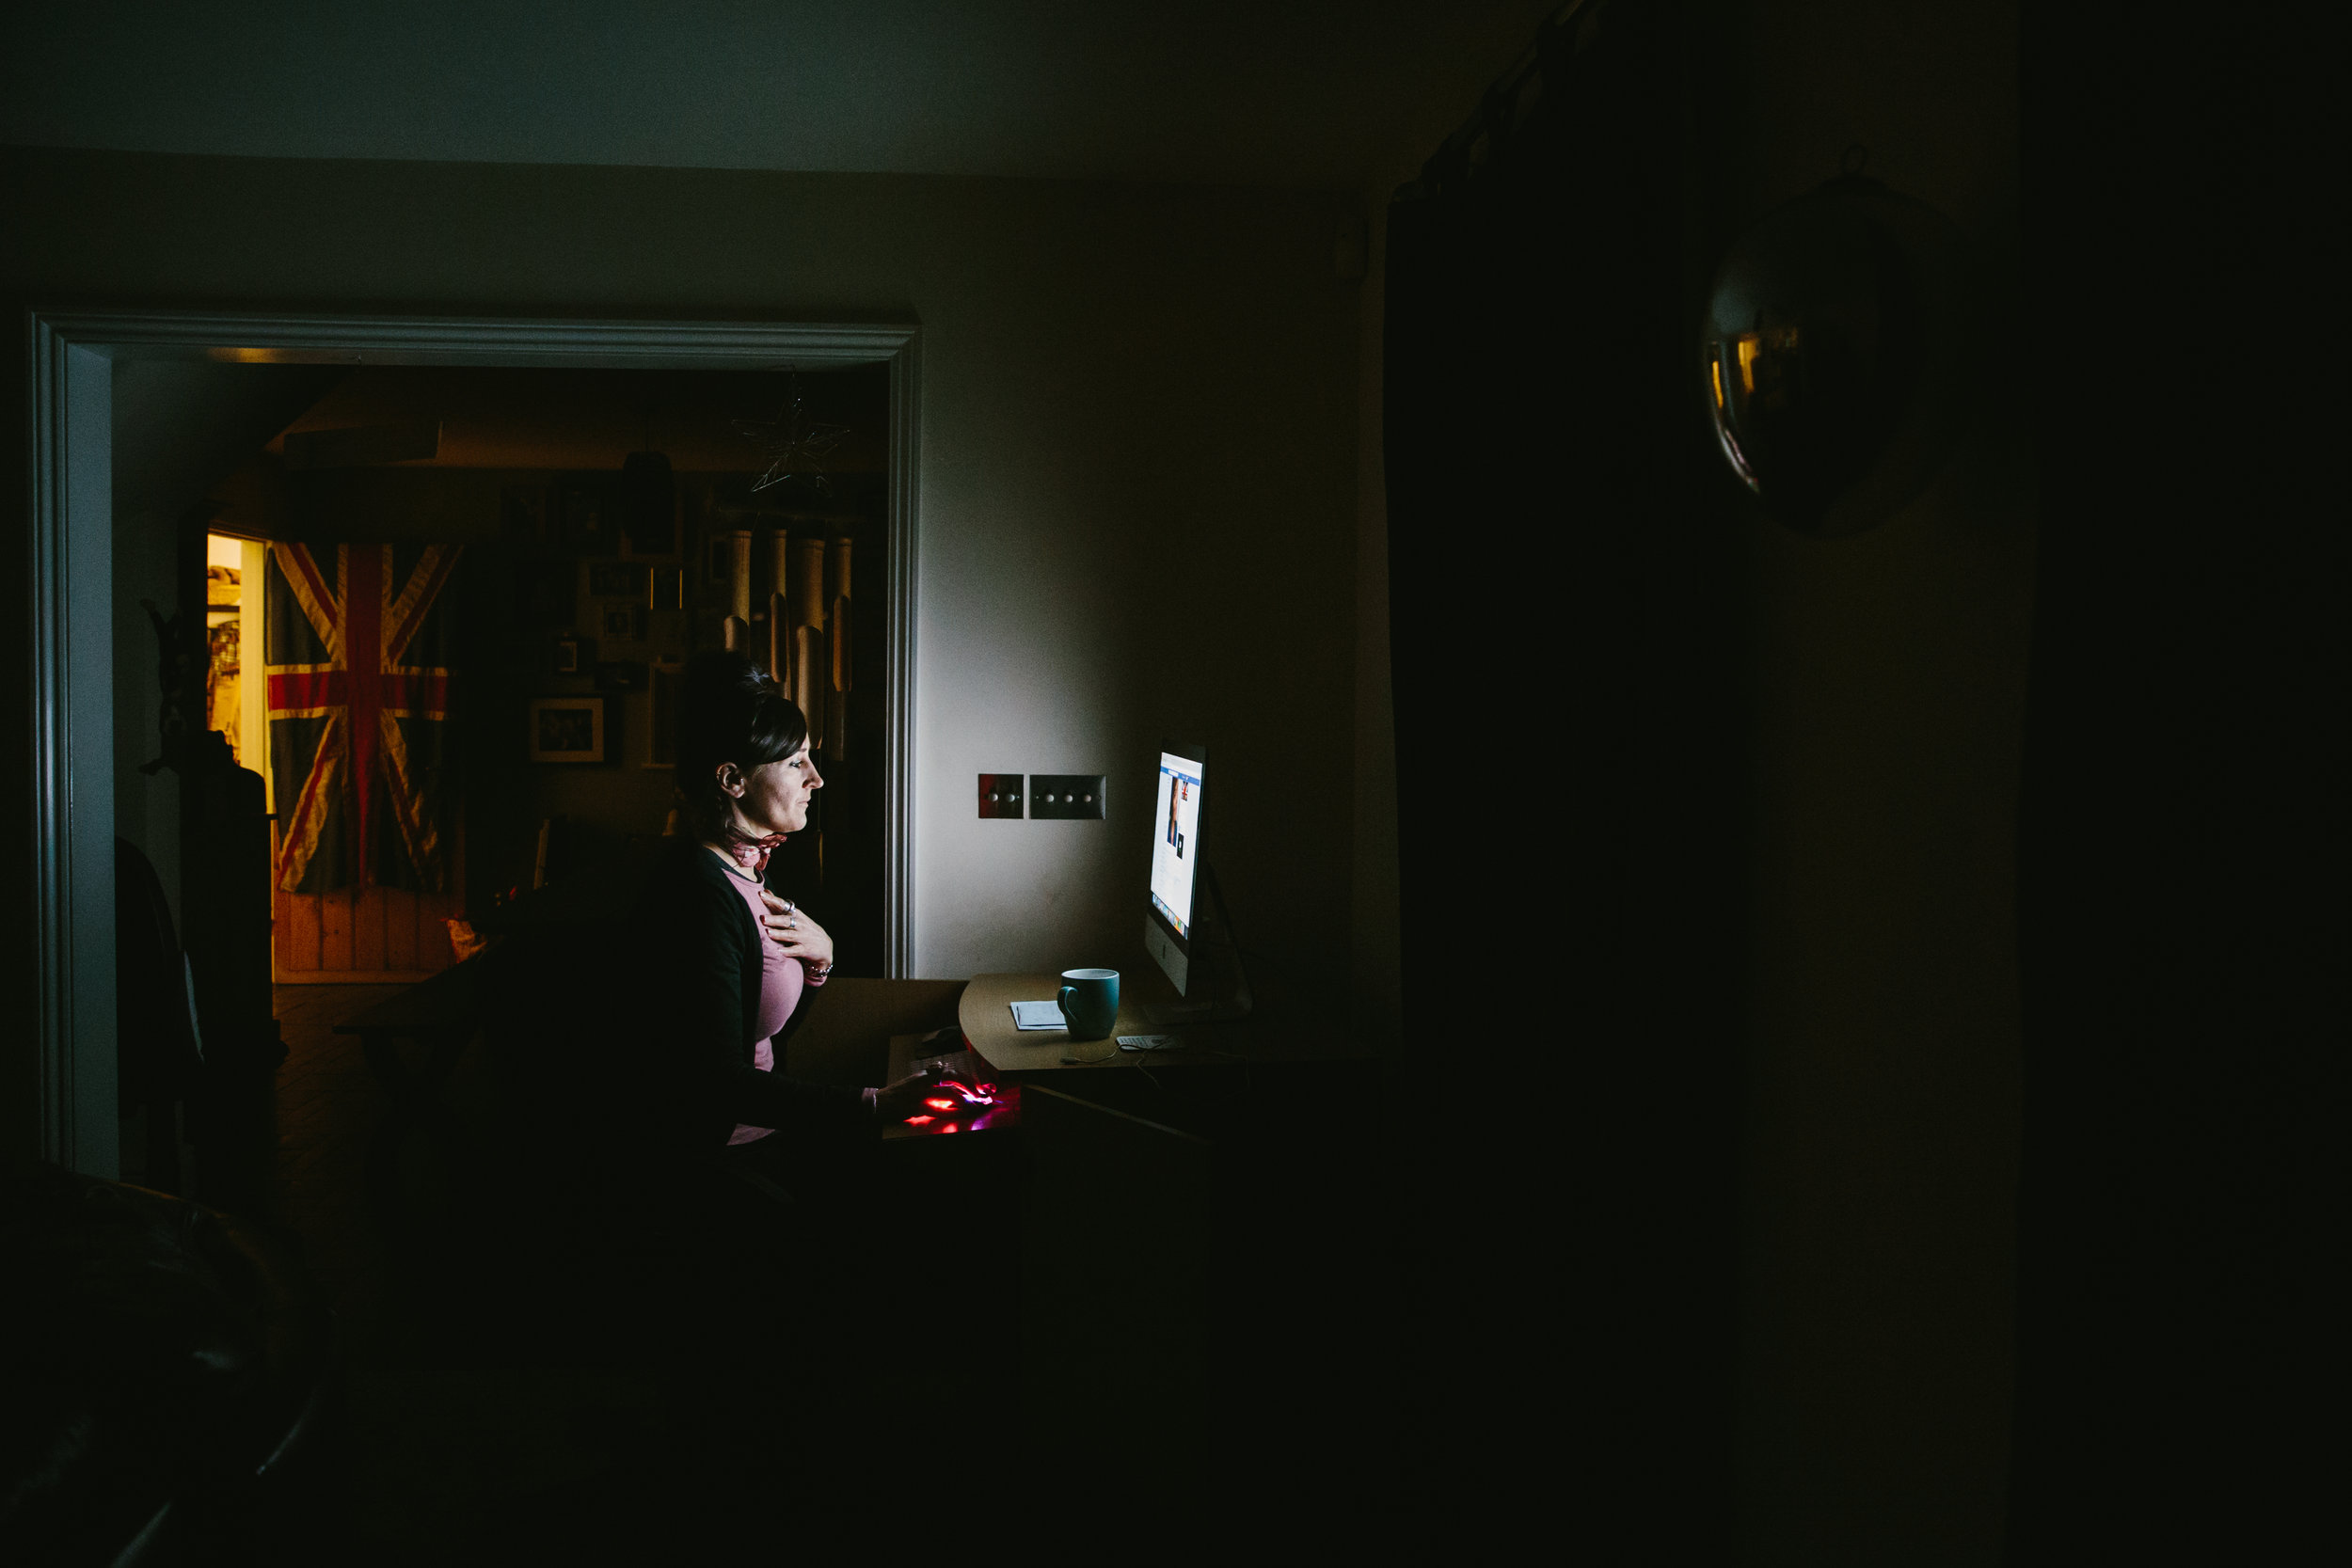  Kath runs the operation from her living room, often working late into the night. Members’ stories frequently reduce her to tears       